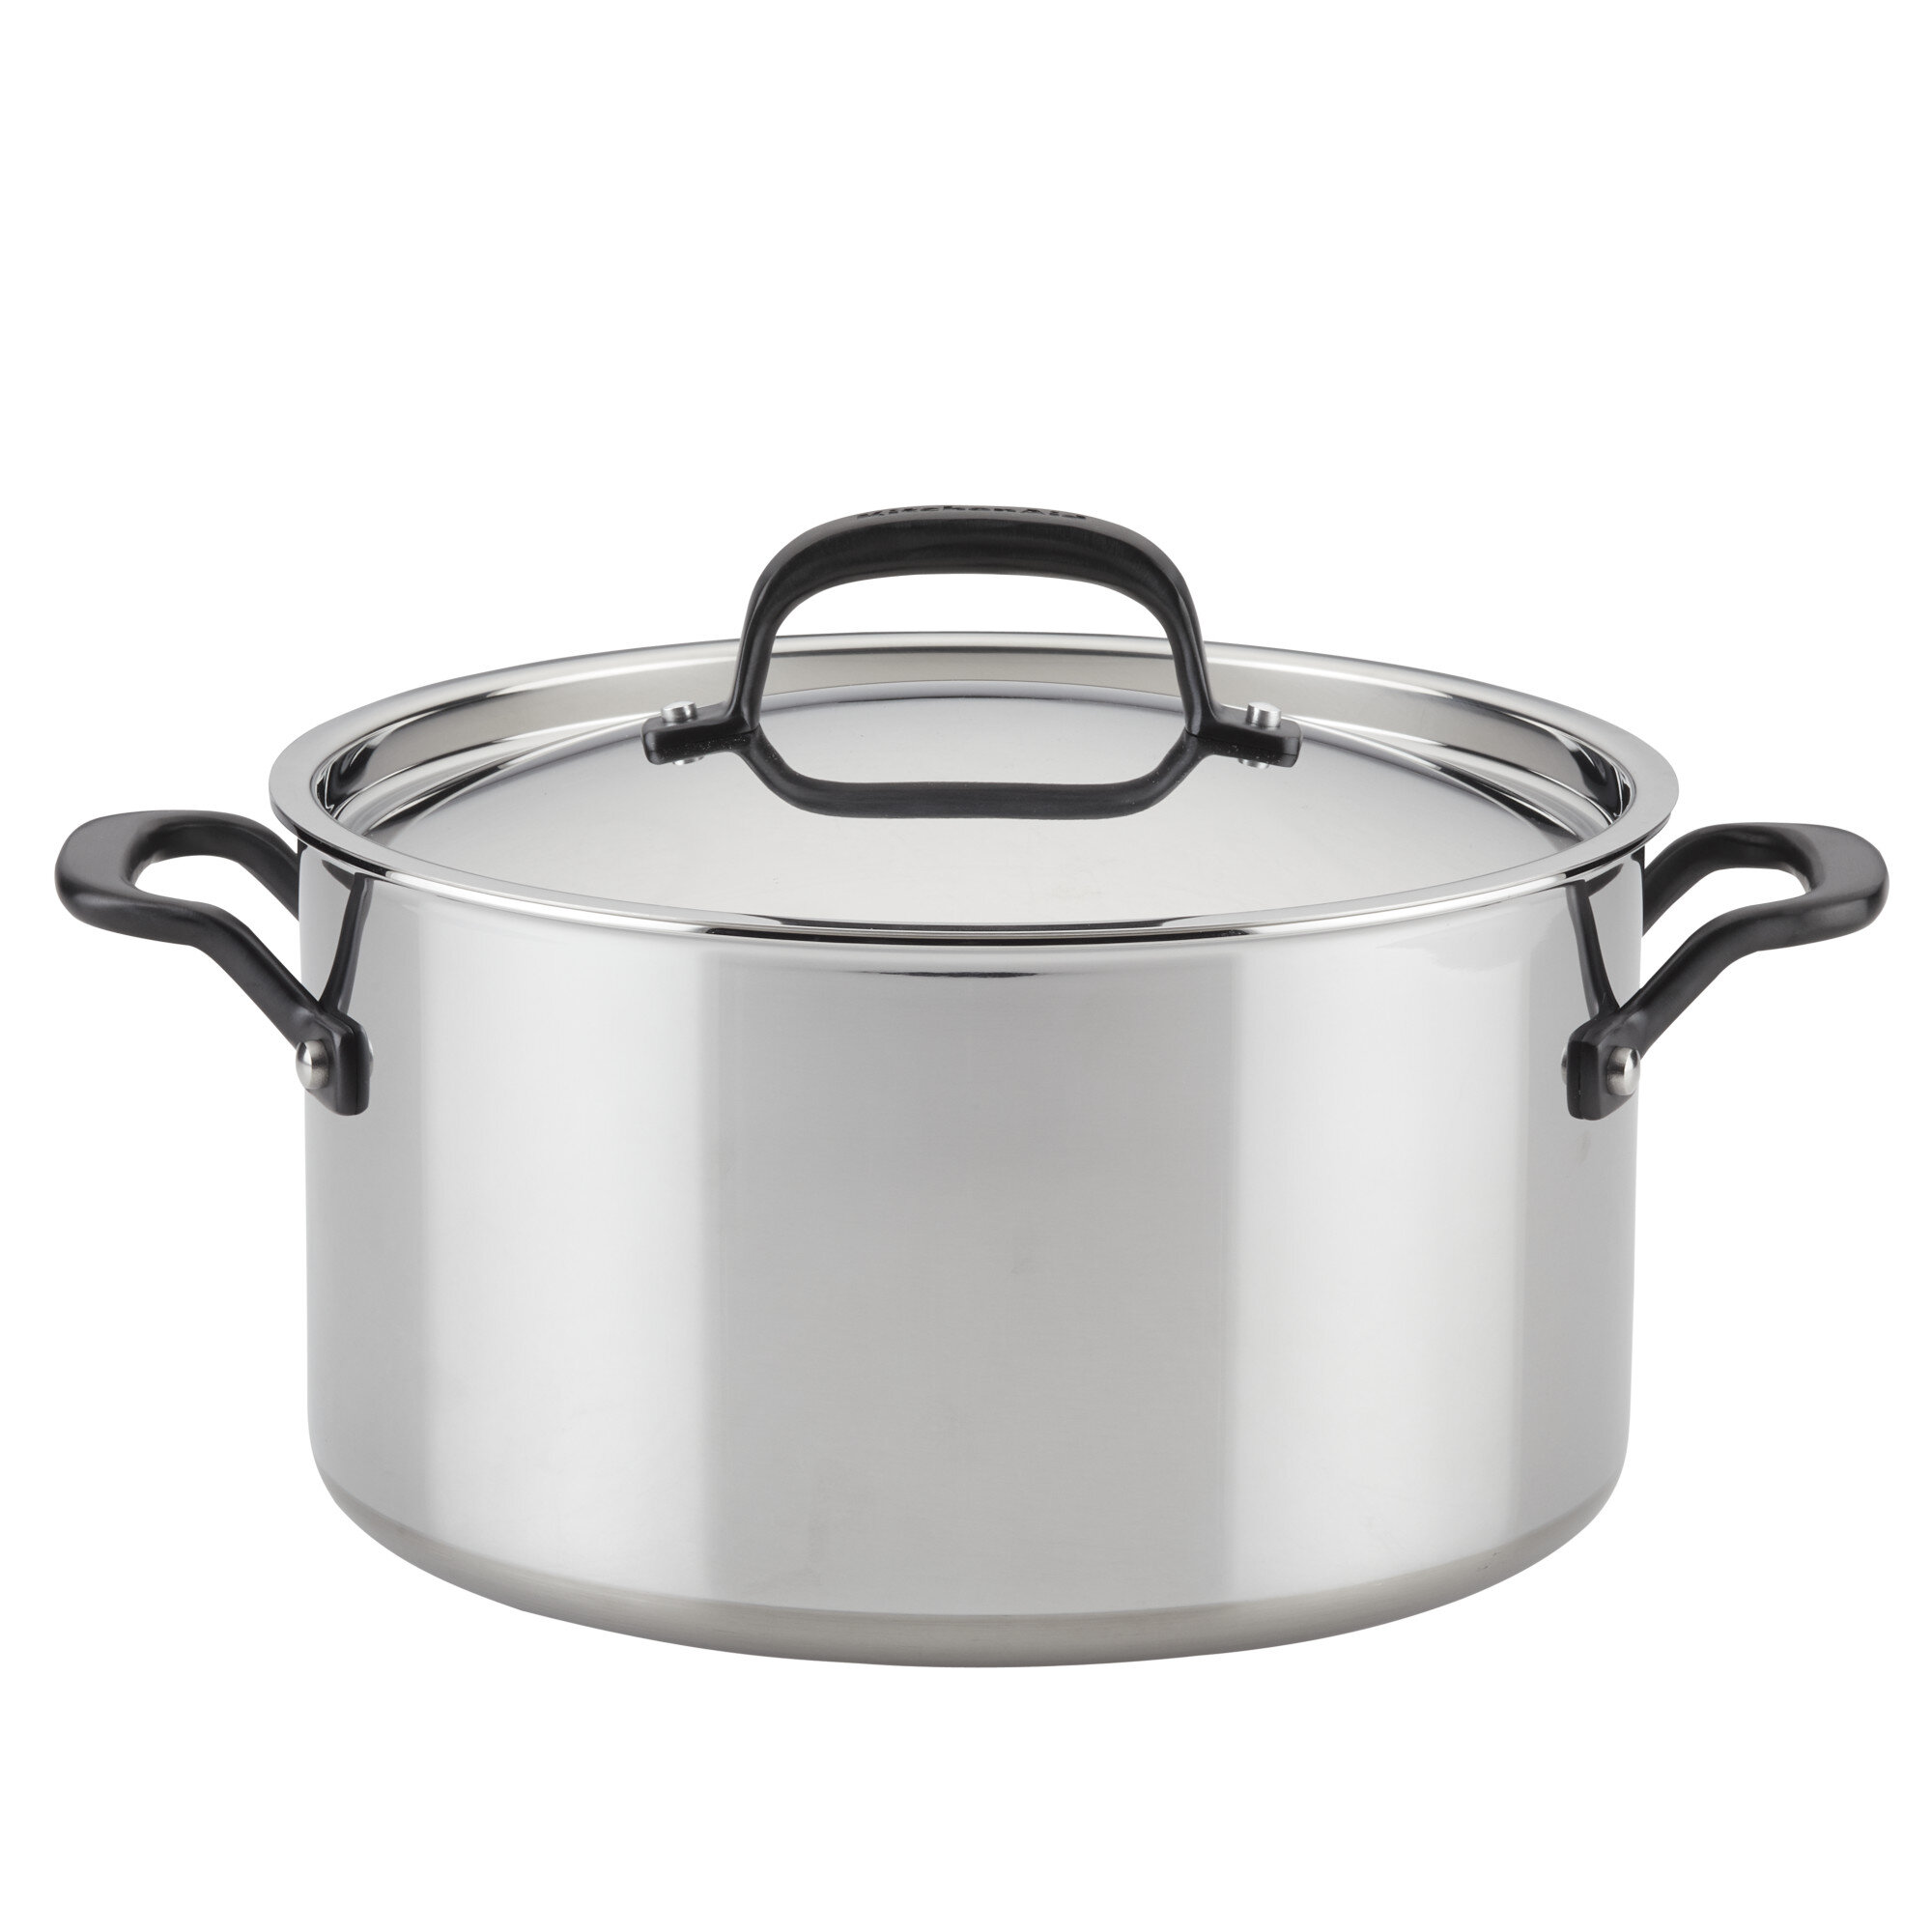 KitchenAid 8-Qt. Stainless Steel and Aluminum Stockpot with Lid